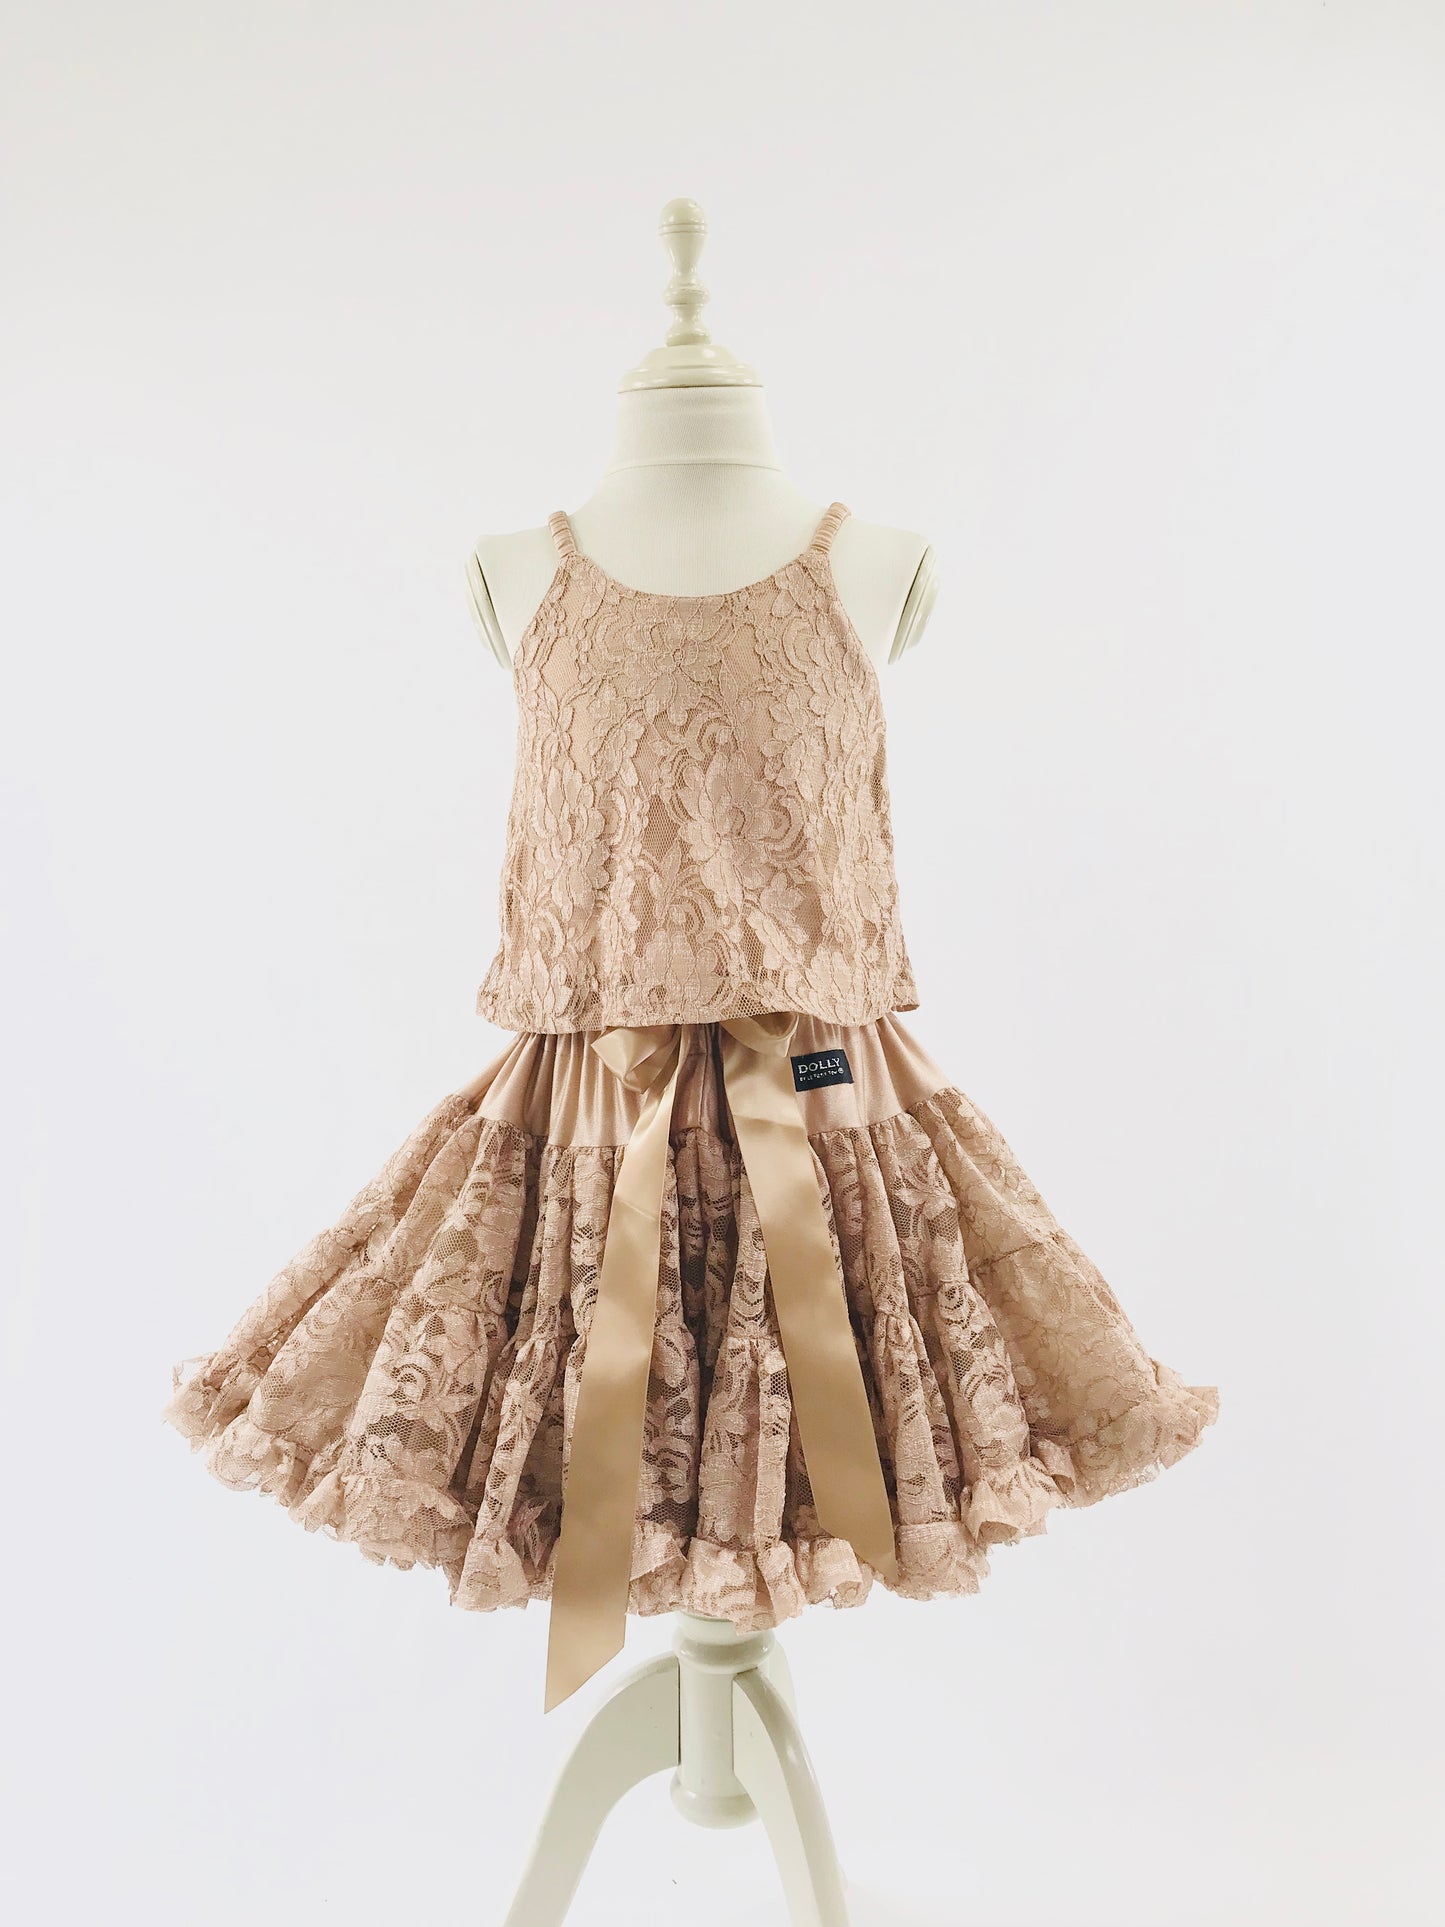 [OUTLET] DOLLY by Le Petit Tom ® LACY SPAGHETTI TOP taupe